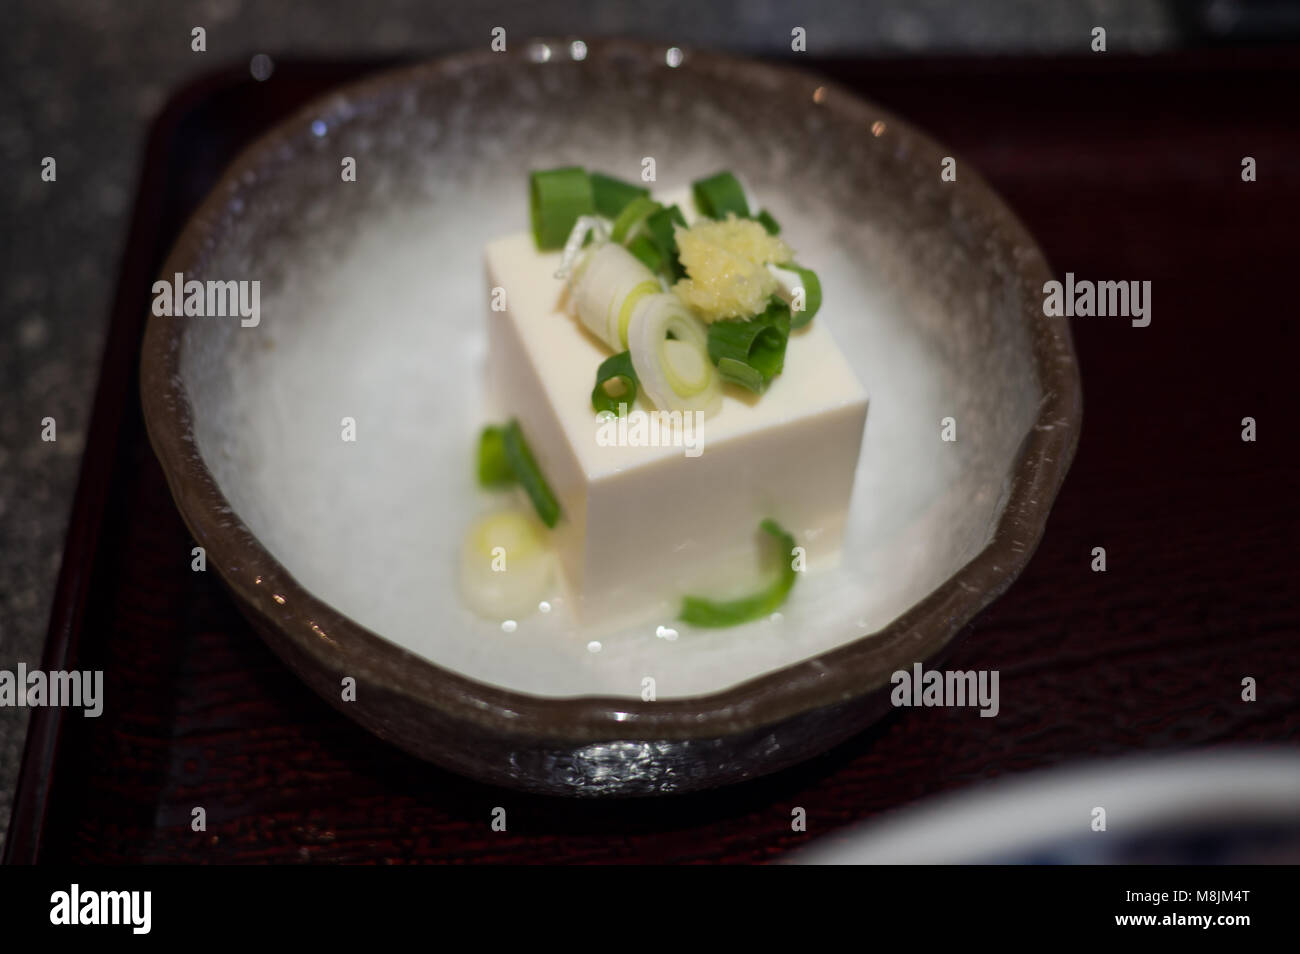 Cold tofu with spring onion garnished on top Stock Photo